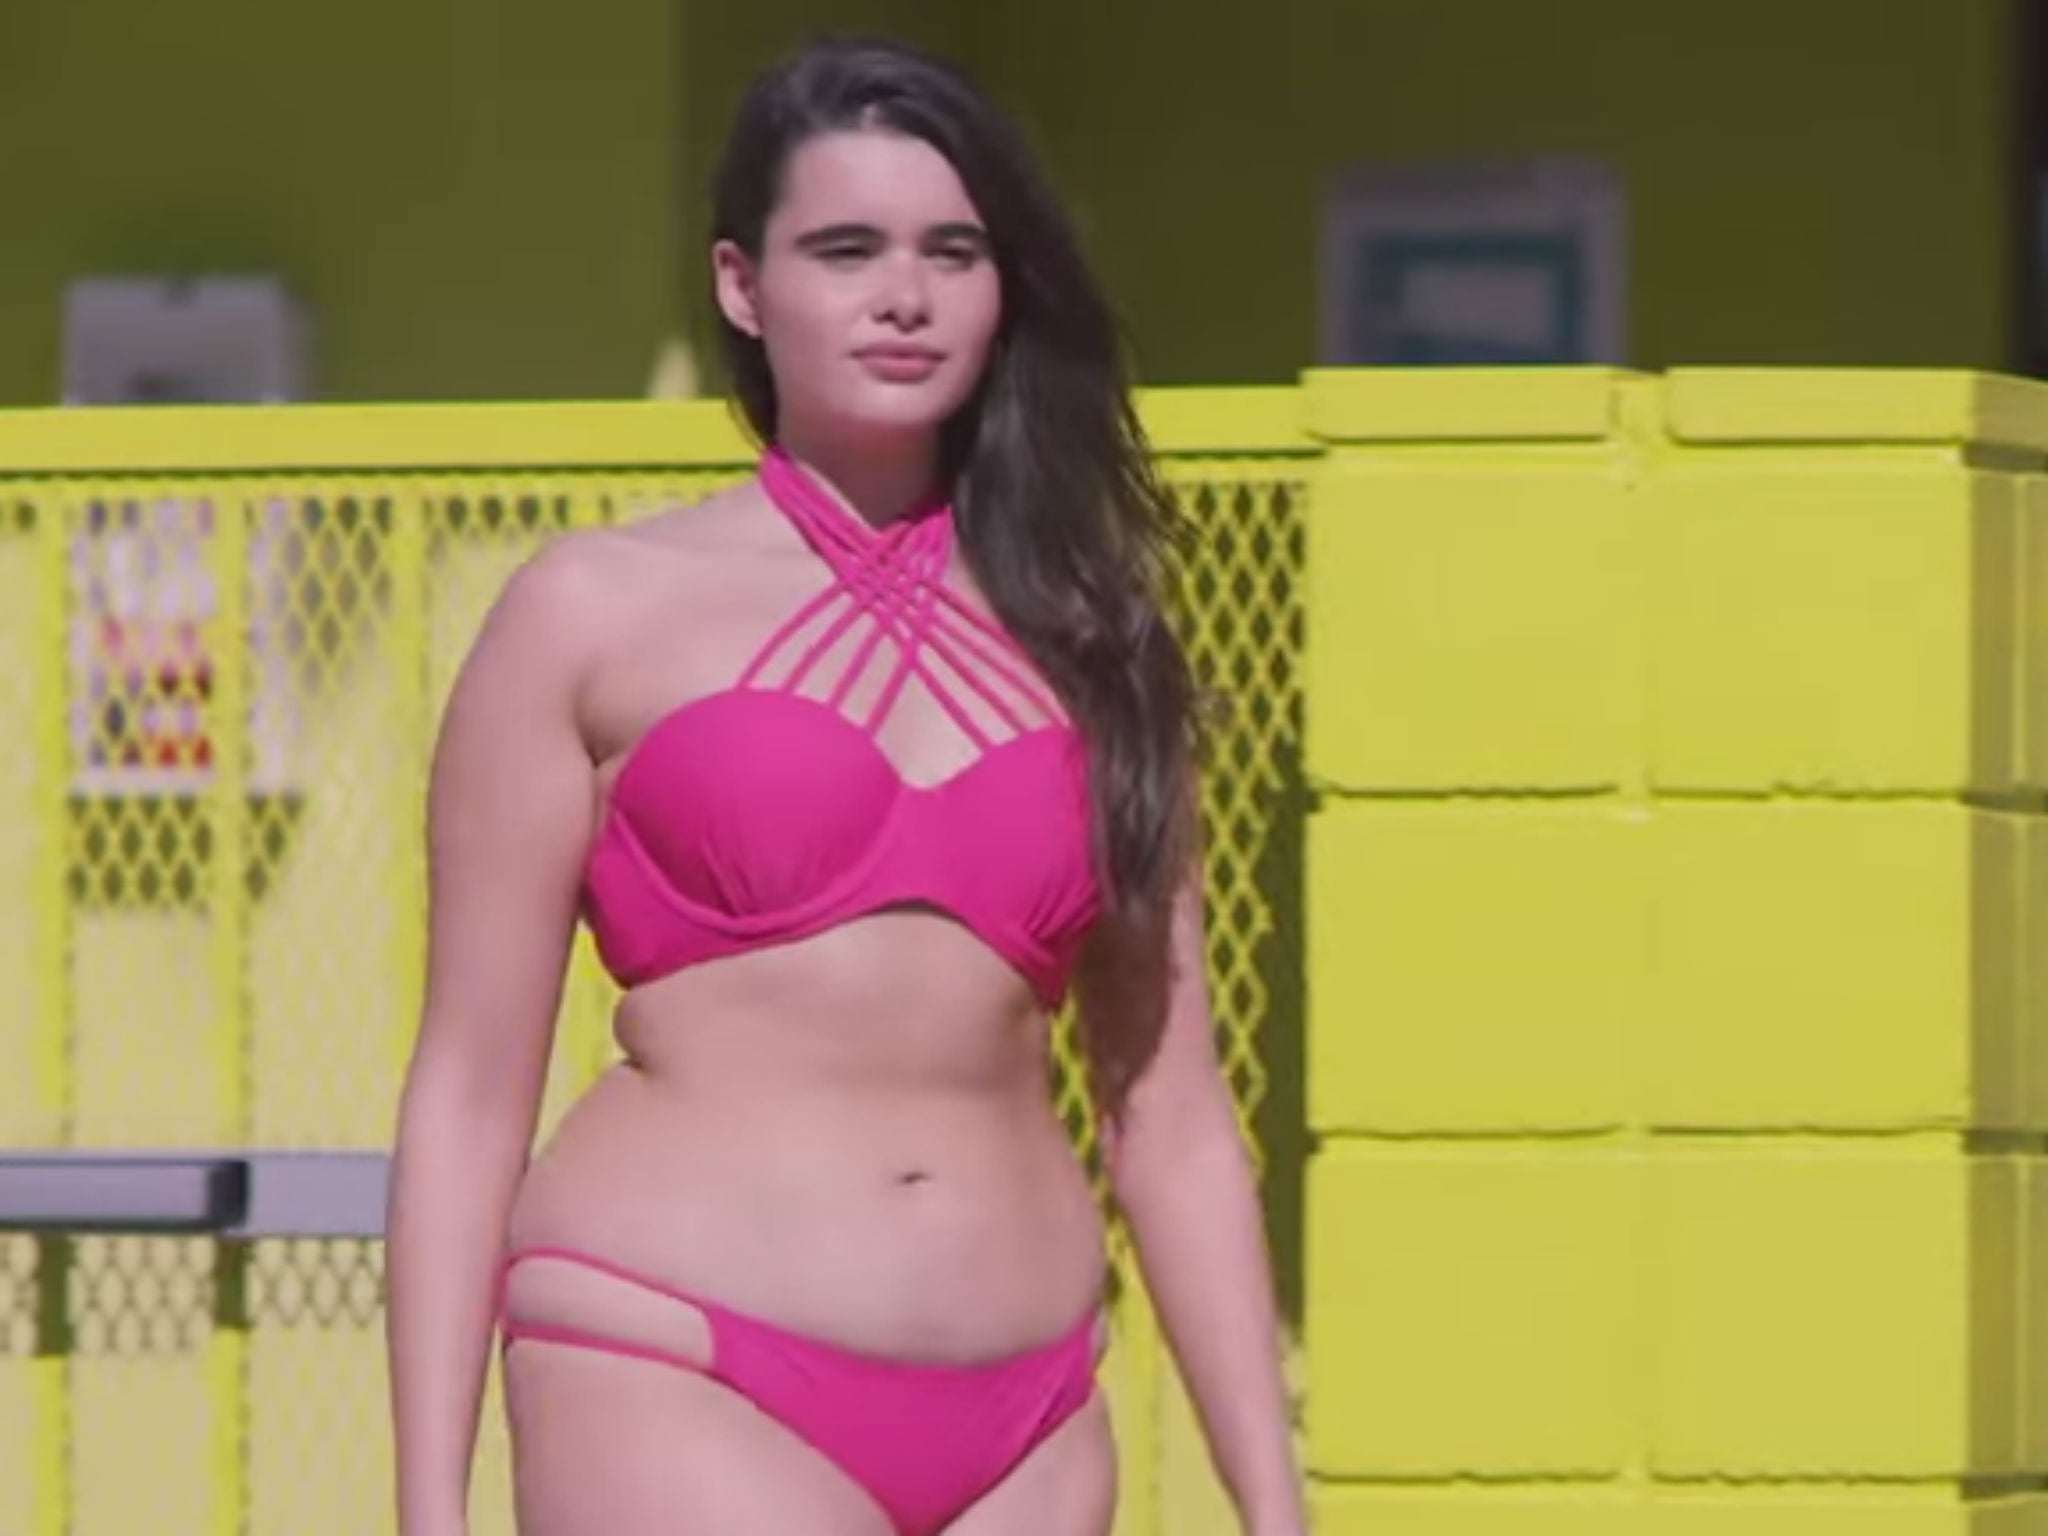 Barbie Ferreira: The US size 12 model taking fashion world by storm with  un-retouched photos, The Independent